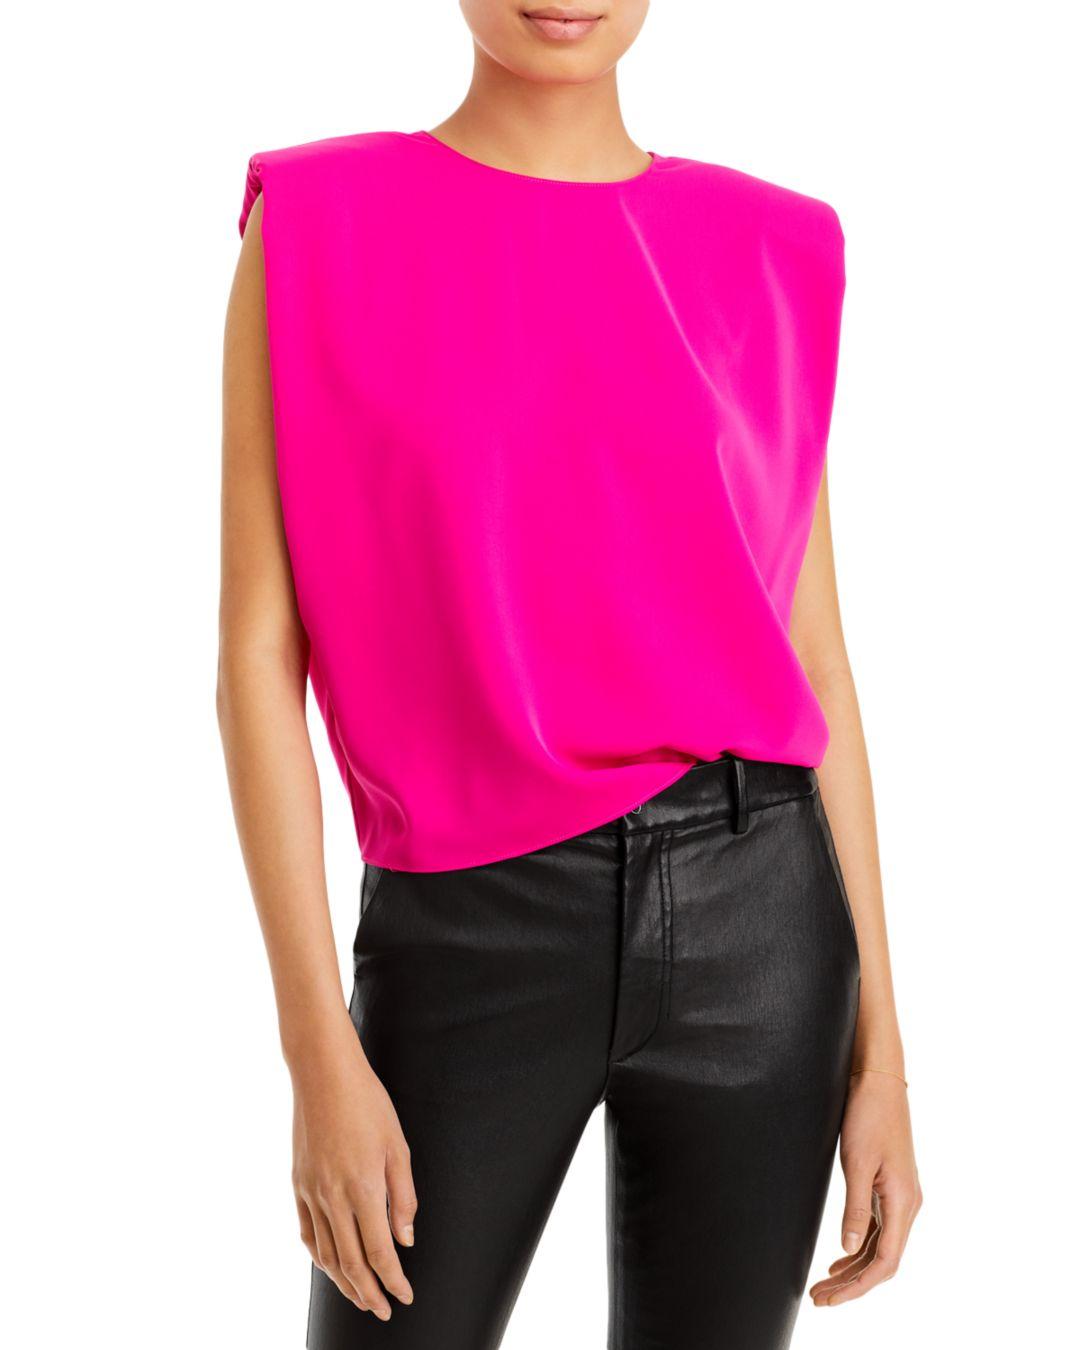 Aqua Synthetic Sleeveless Shoulder Pad Top in Hot Pink (Pink) | Lyst